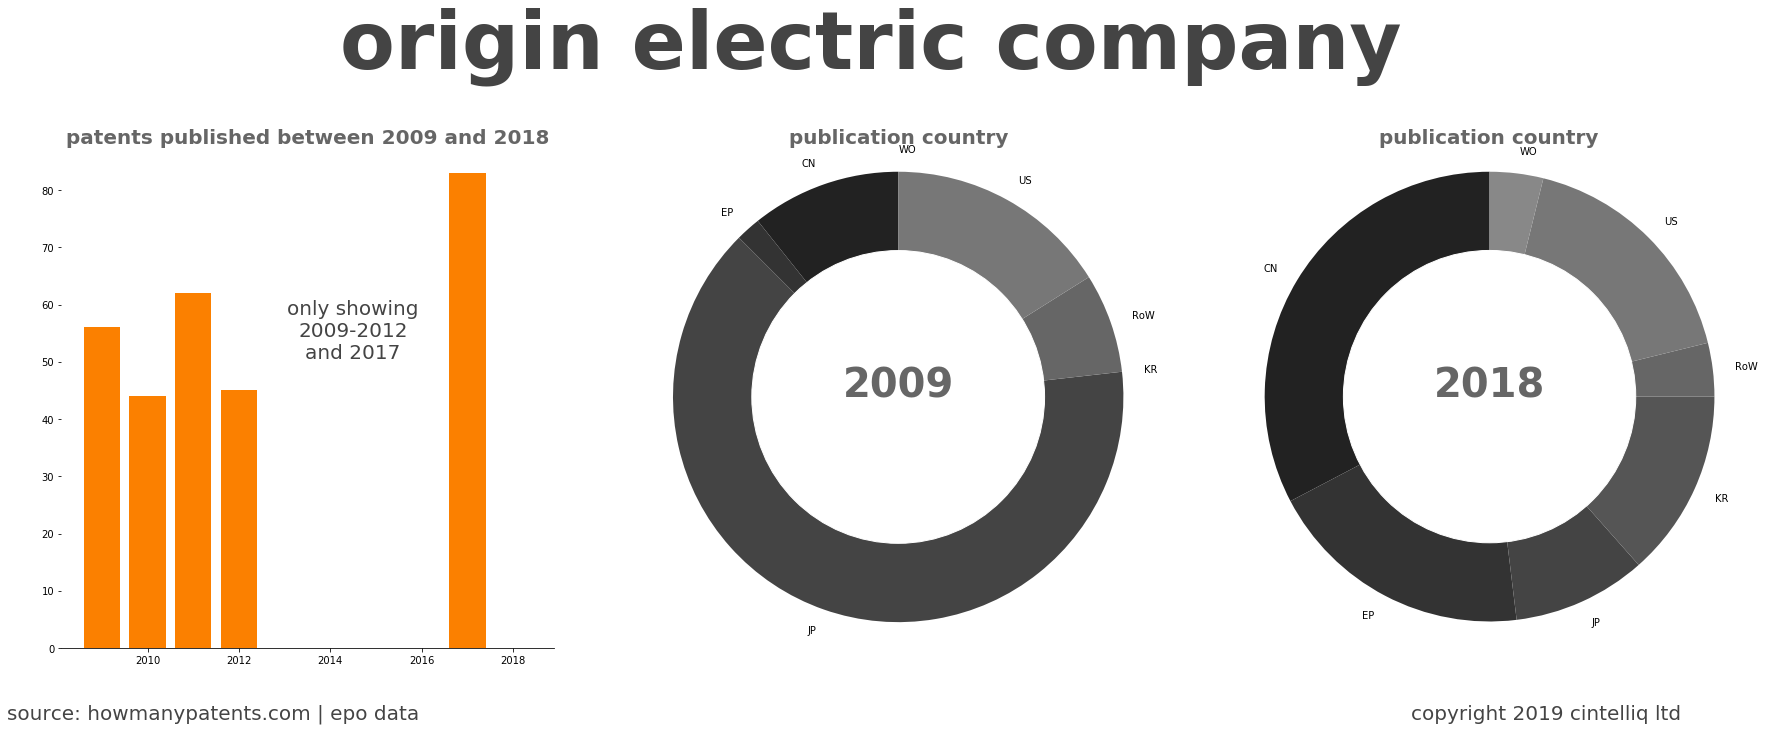 summary of patents for Origin Electric Company